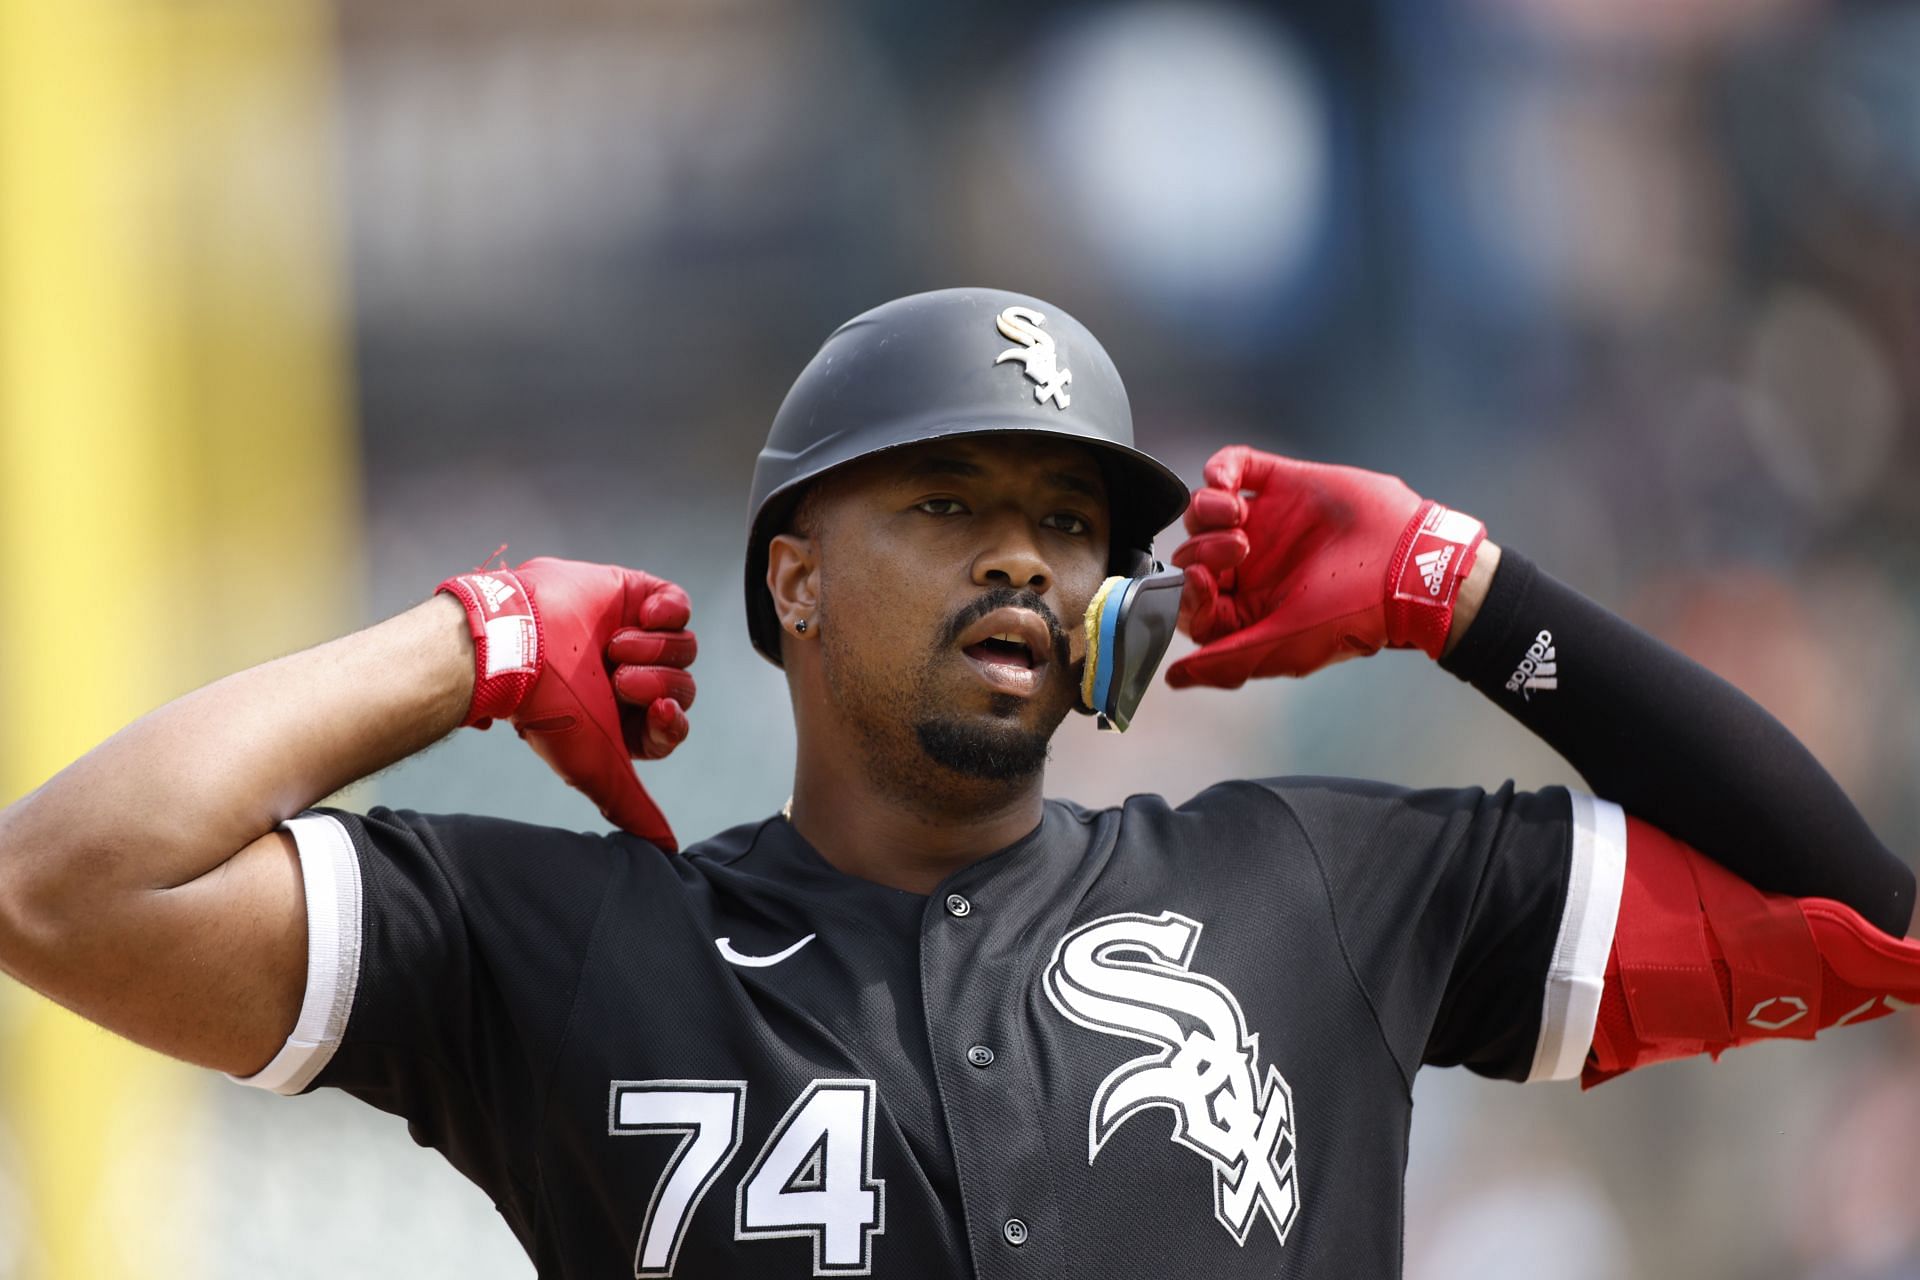 Eloy Jimenez drops White Sox Spring Training injury update, wants to play  outfield in 2023